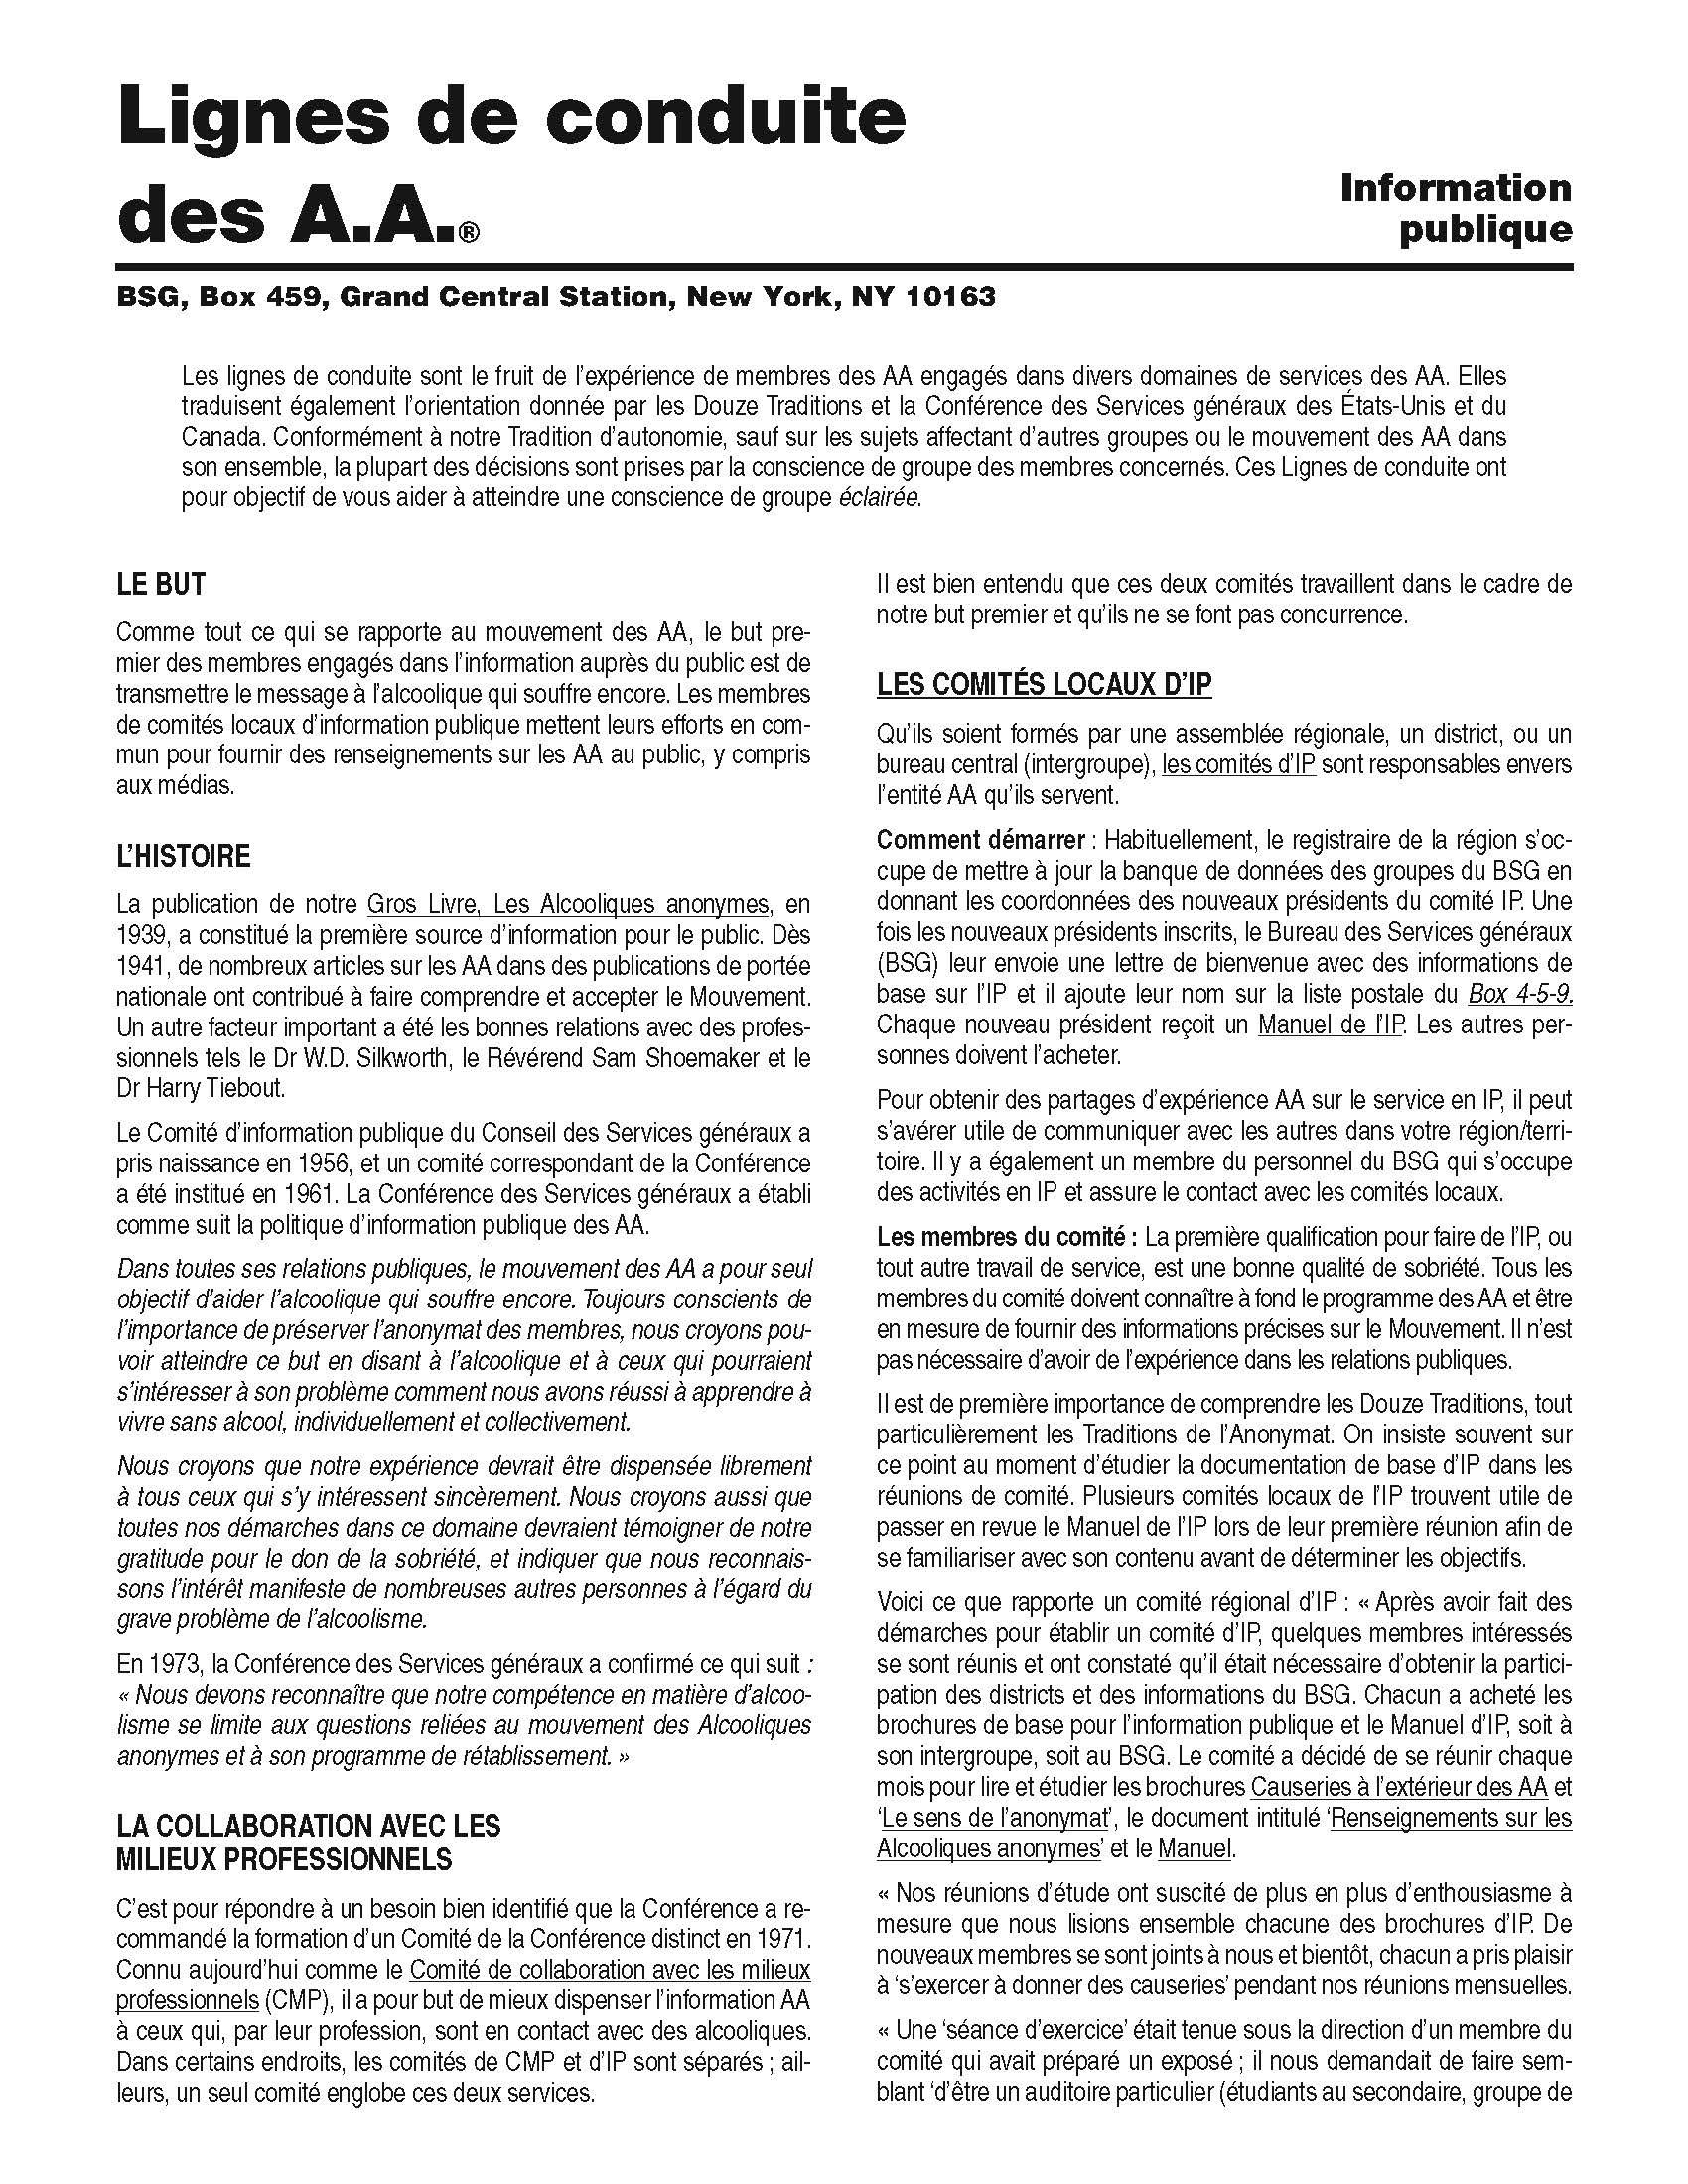 fmg-7_publicinfo_Page_1